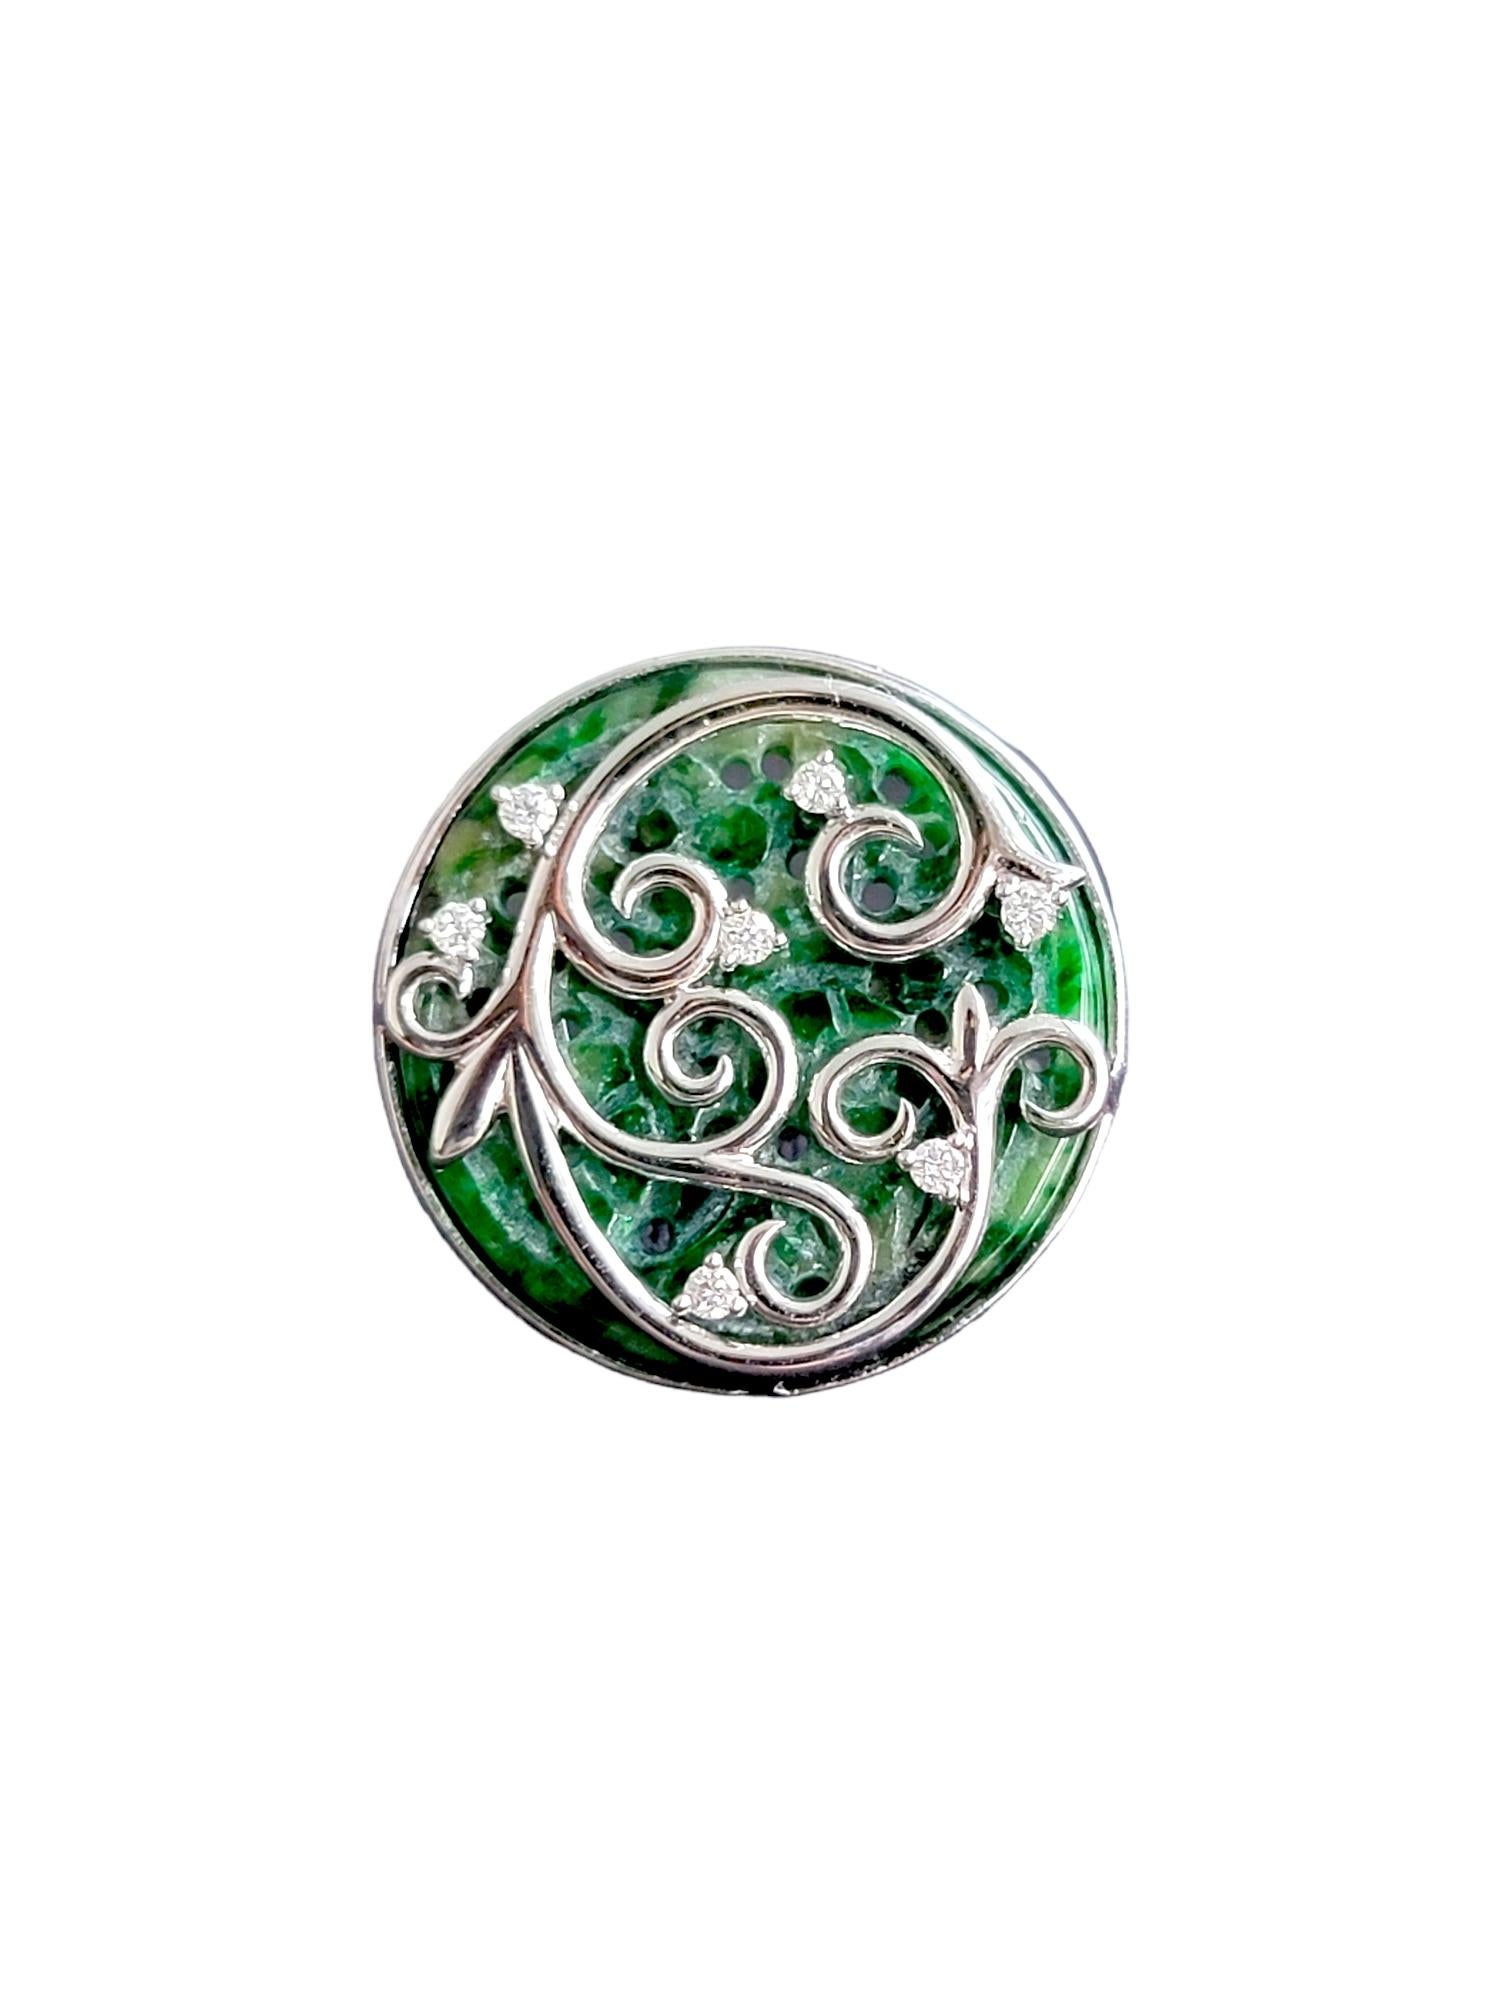 Gardens of Versailles Brooch (with Burmese A-Jadeite, 18K White Gold, Diamonds) In New Condition For Sale In Kowloon, HK